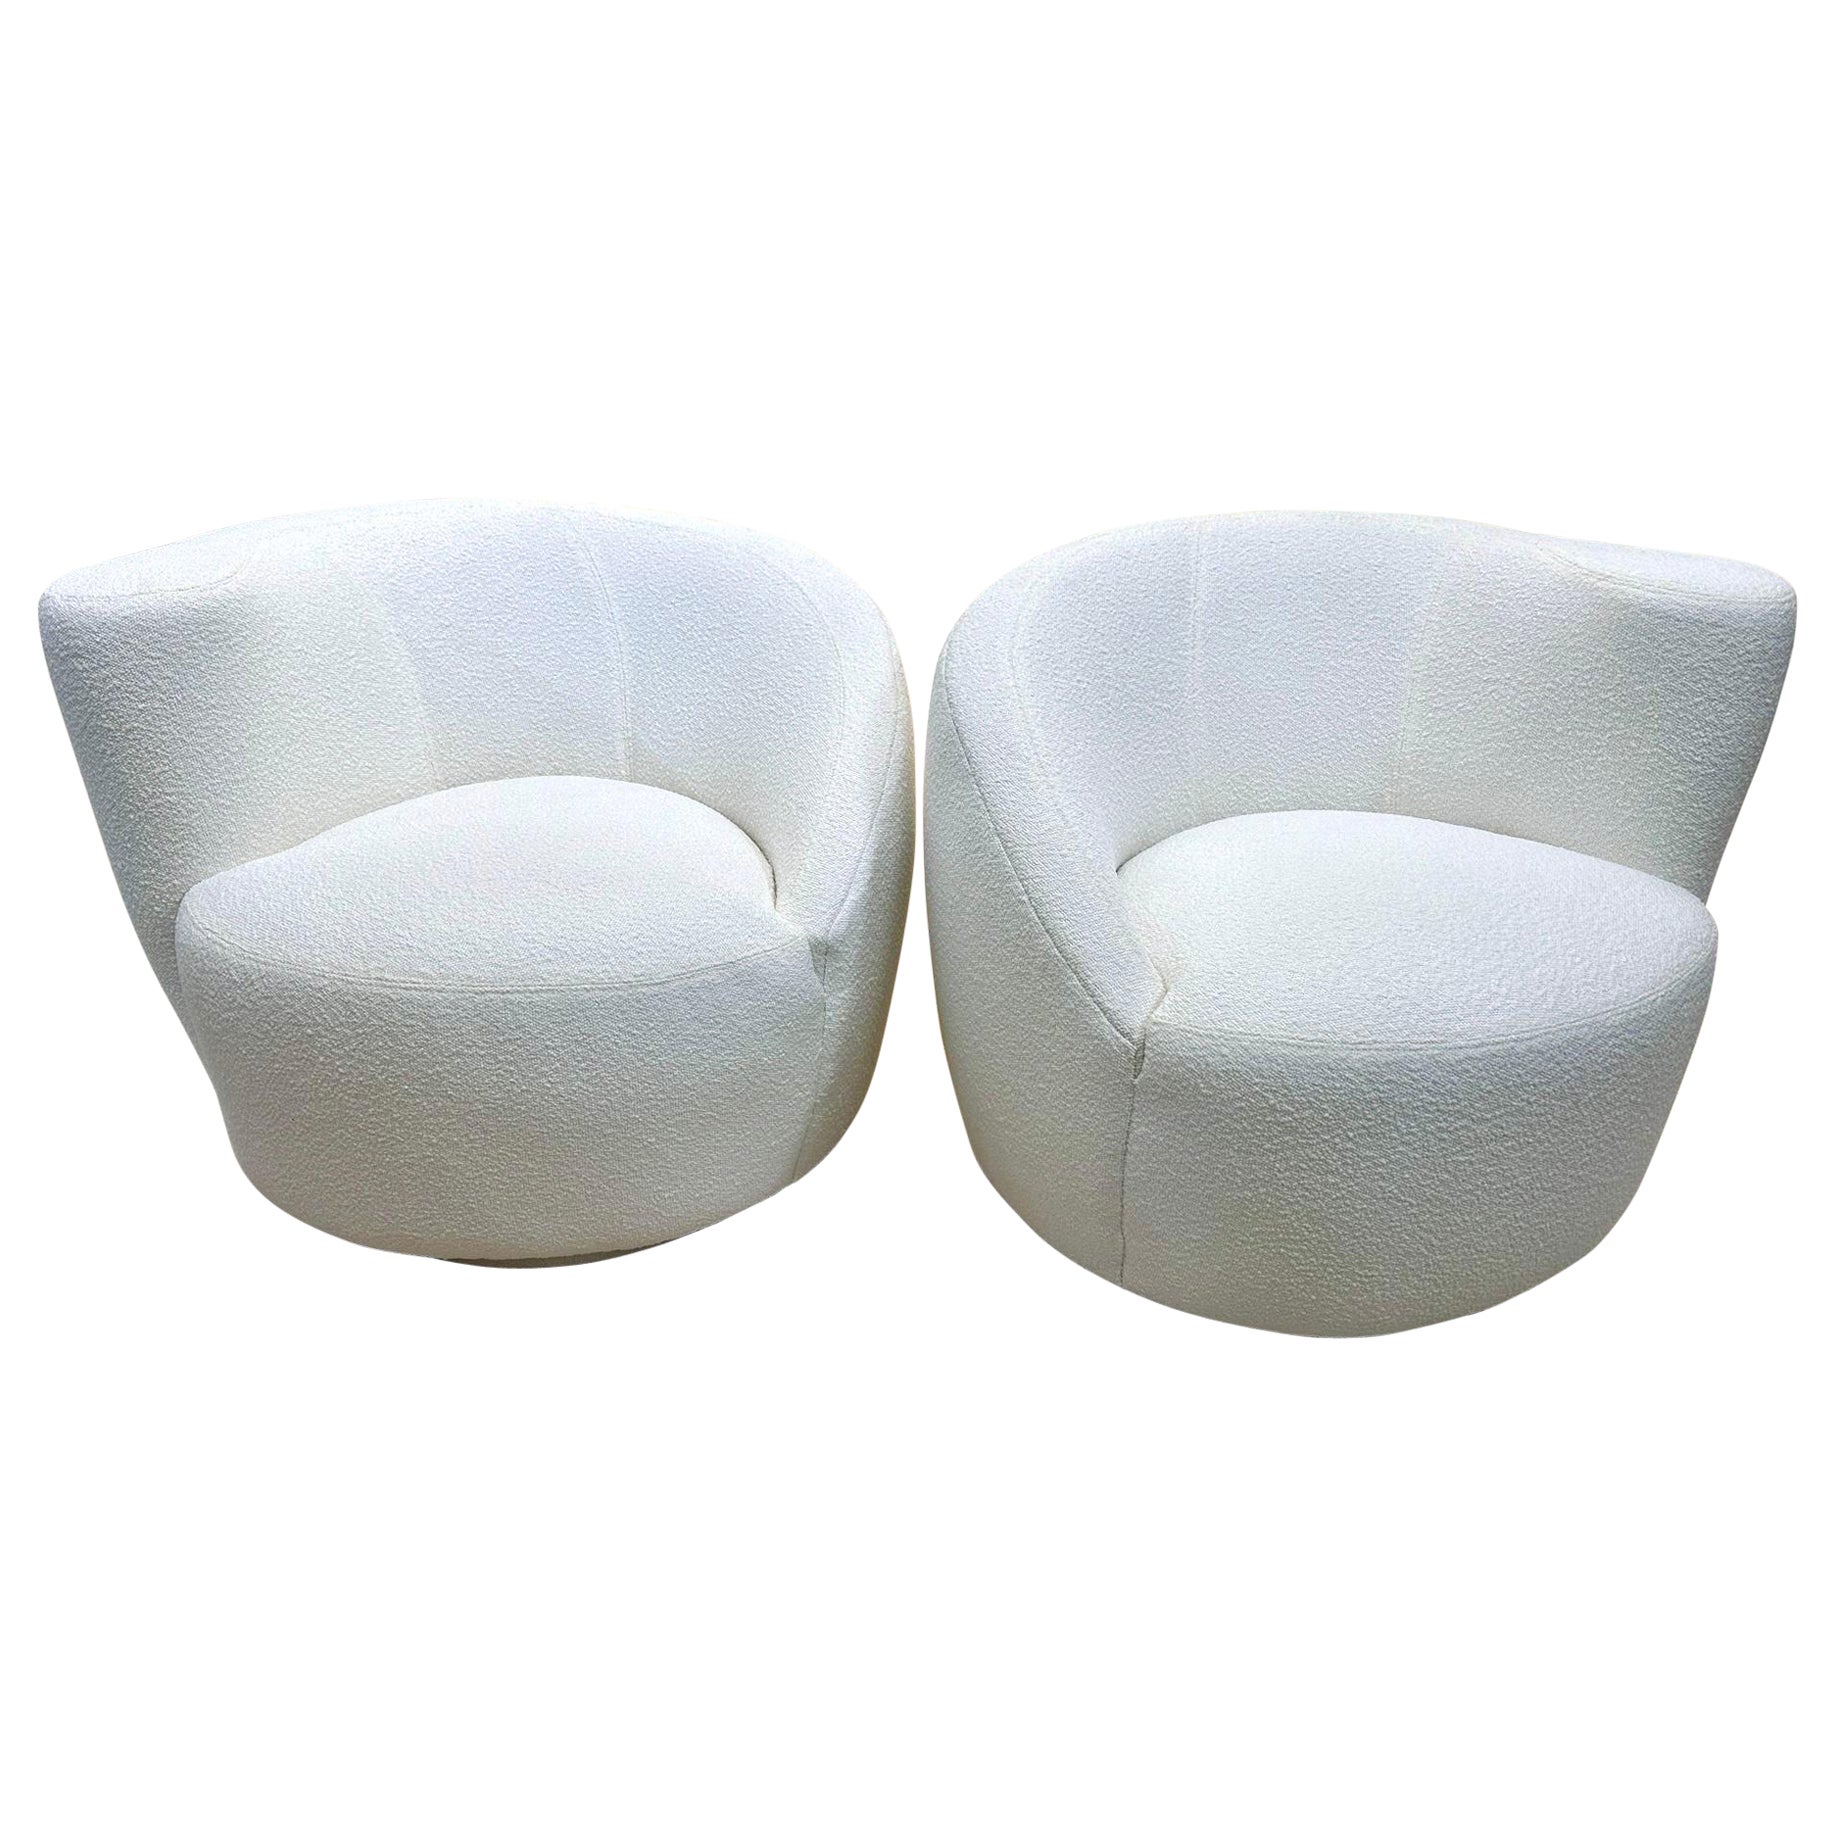 Vladimir Kagan Corkscrew Swivel Chairs for Directional in Bouclé, PAIR For Sale